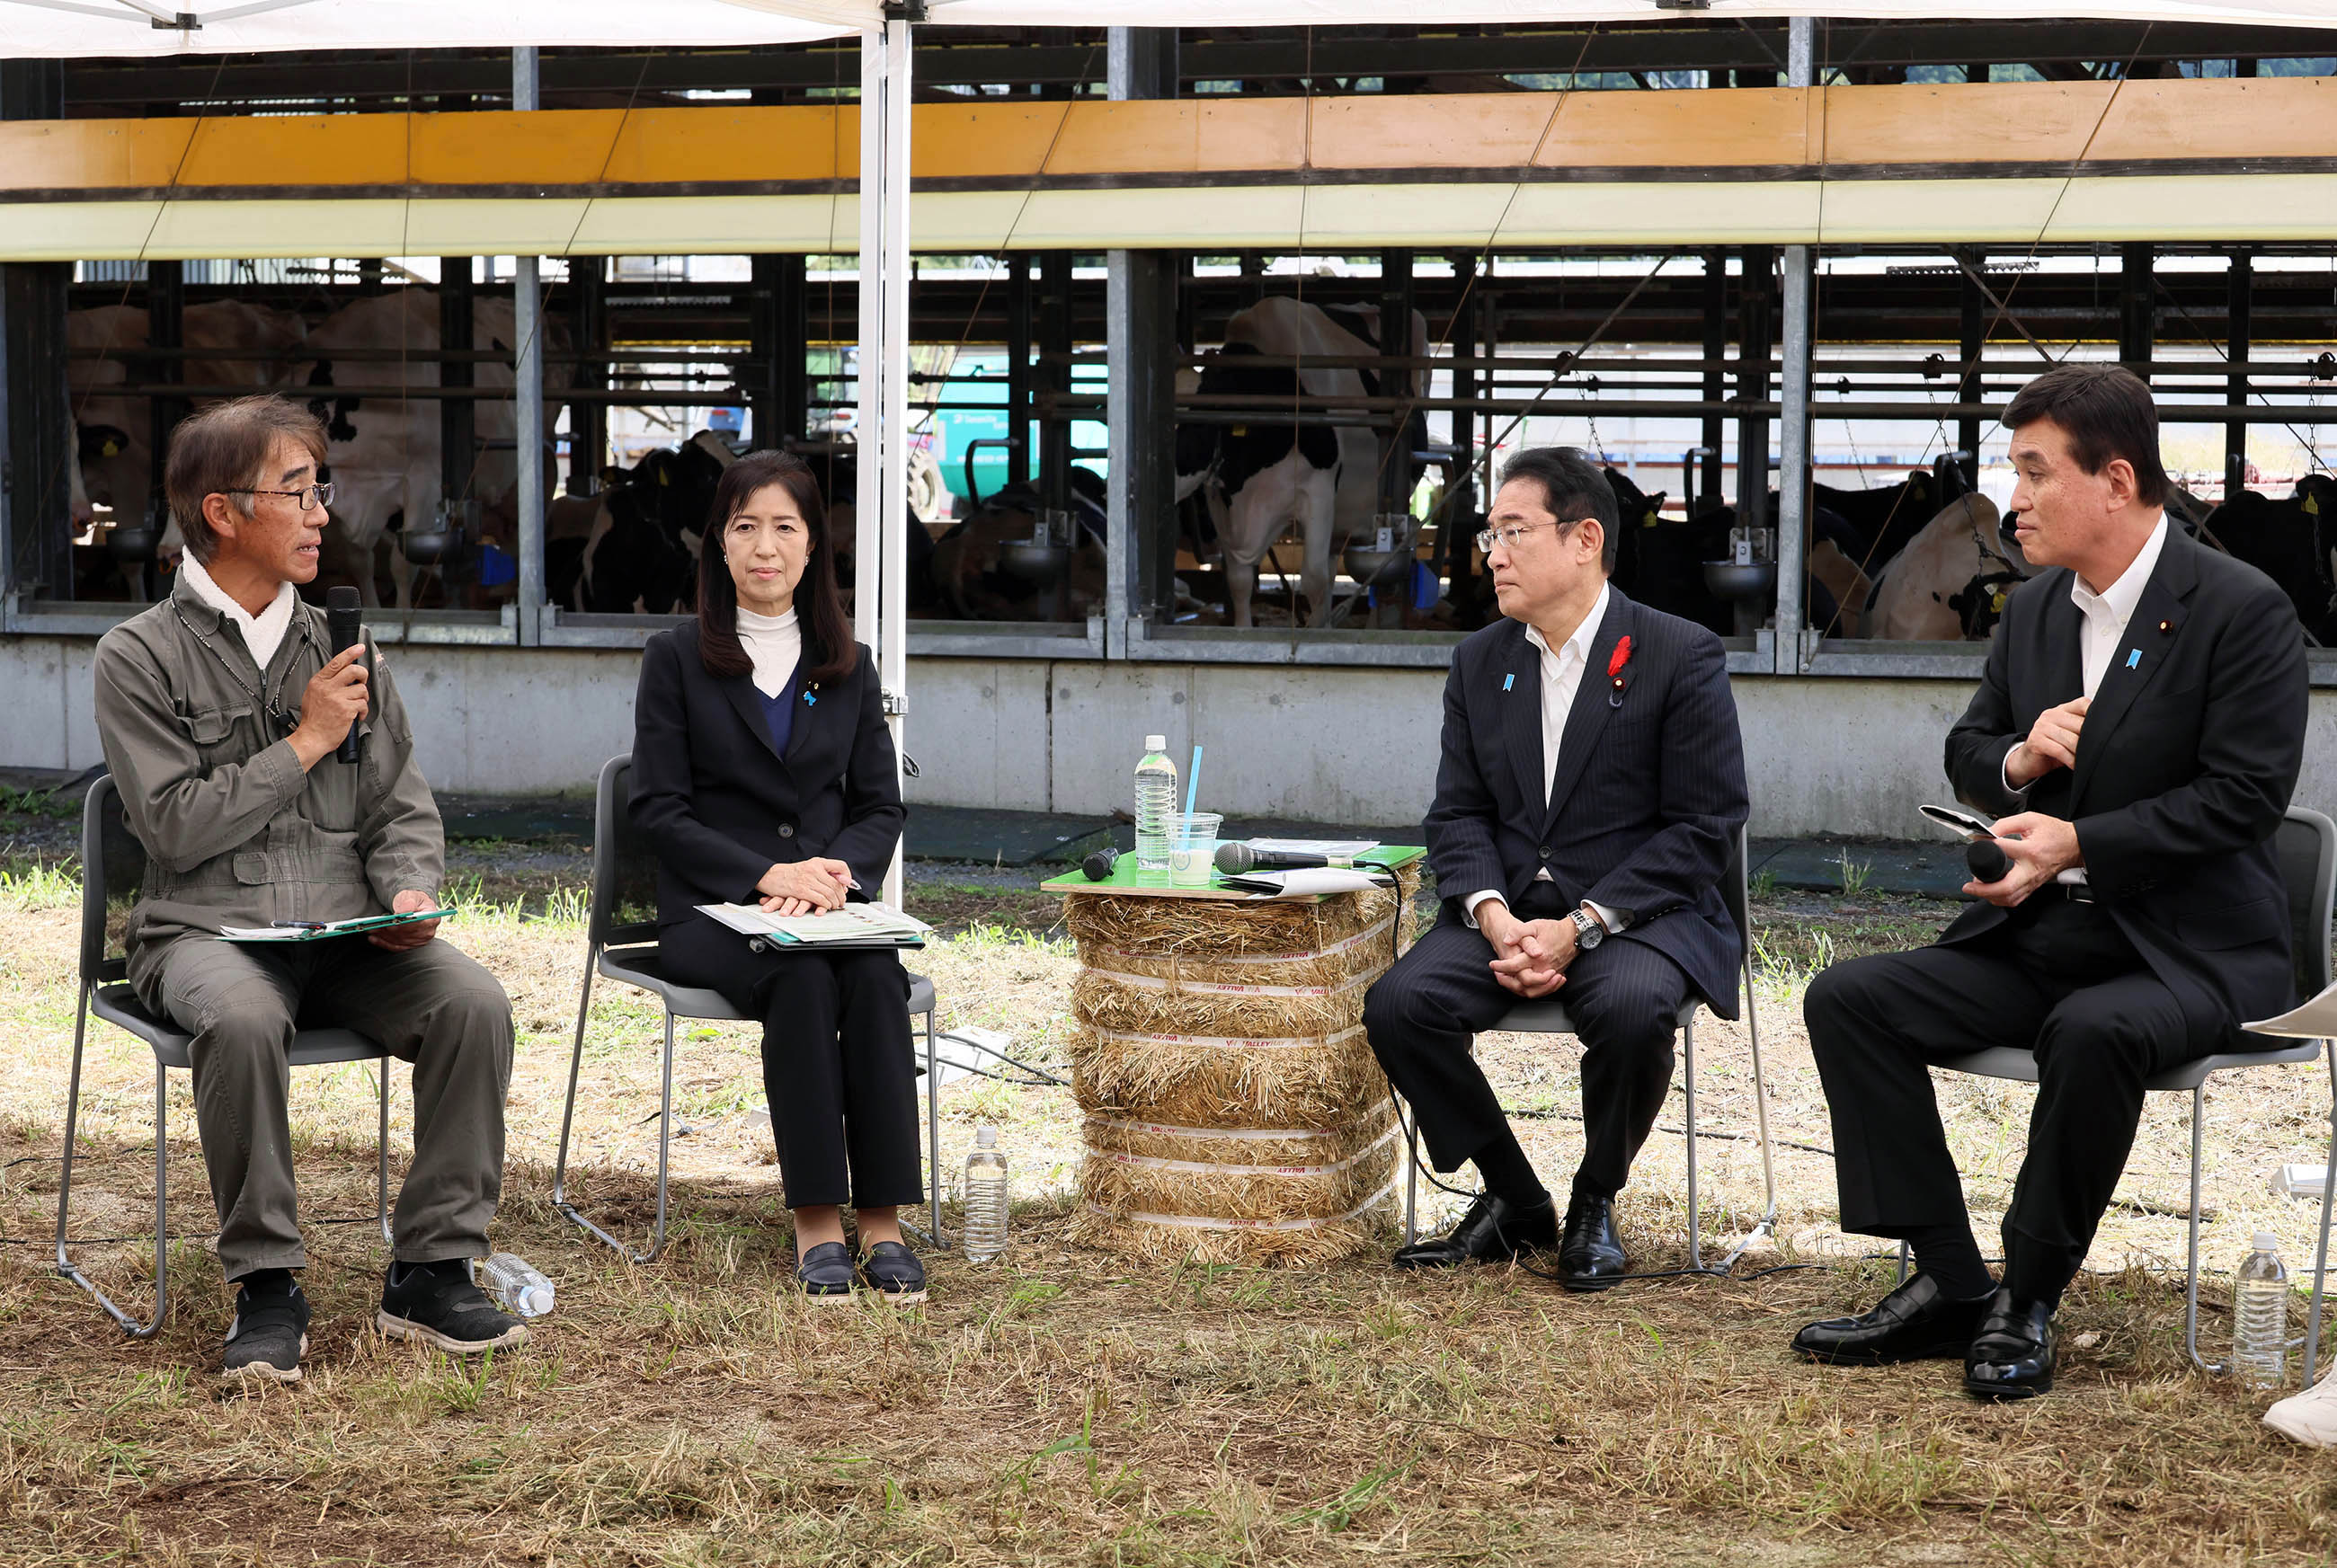 Prime Minister Kishida listening to participants at the small group talk (2)